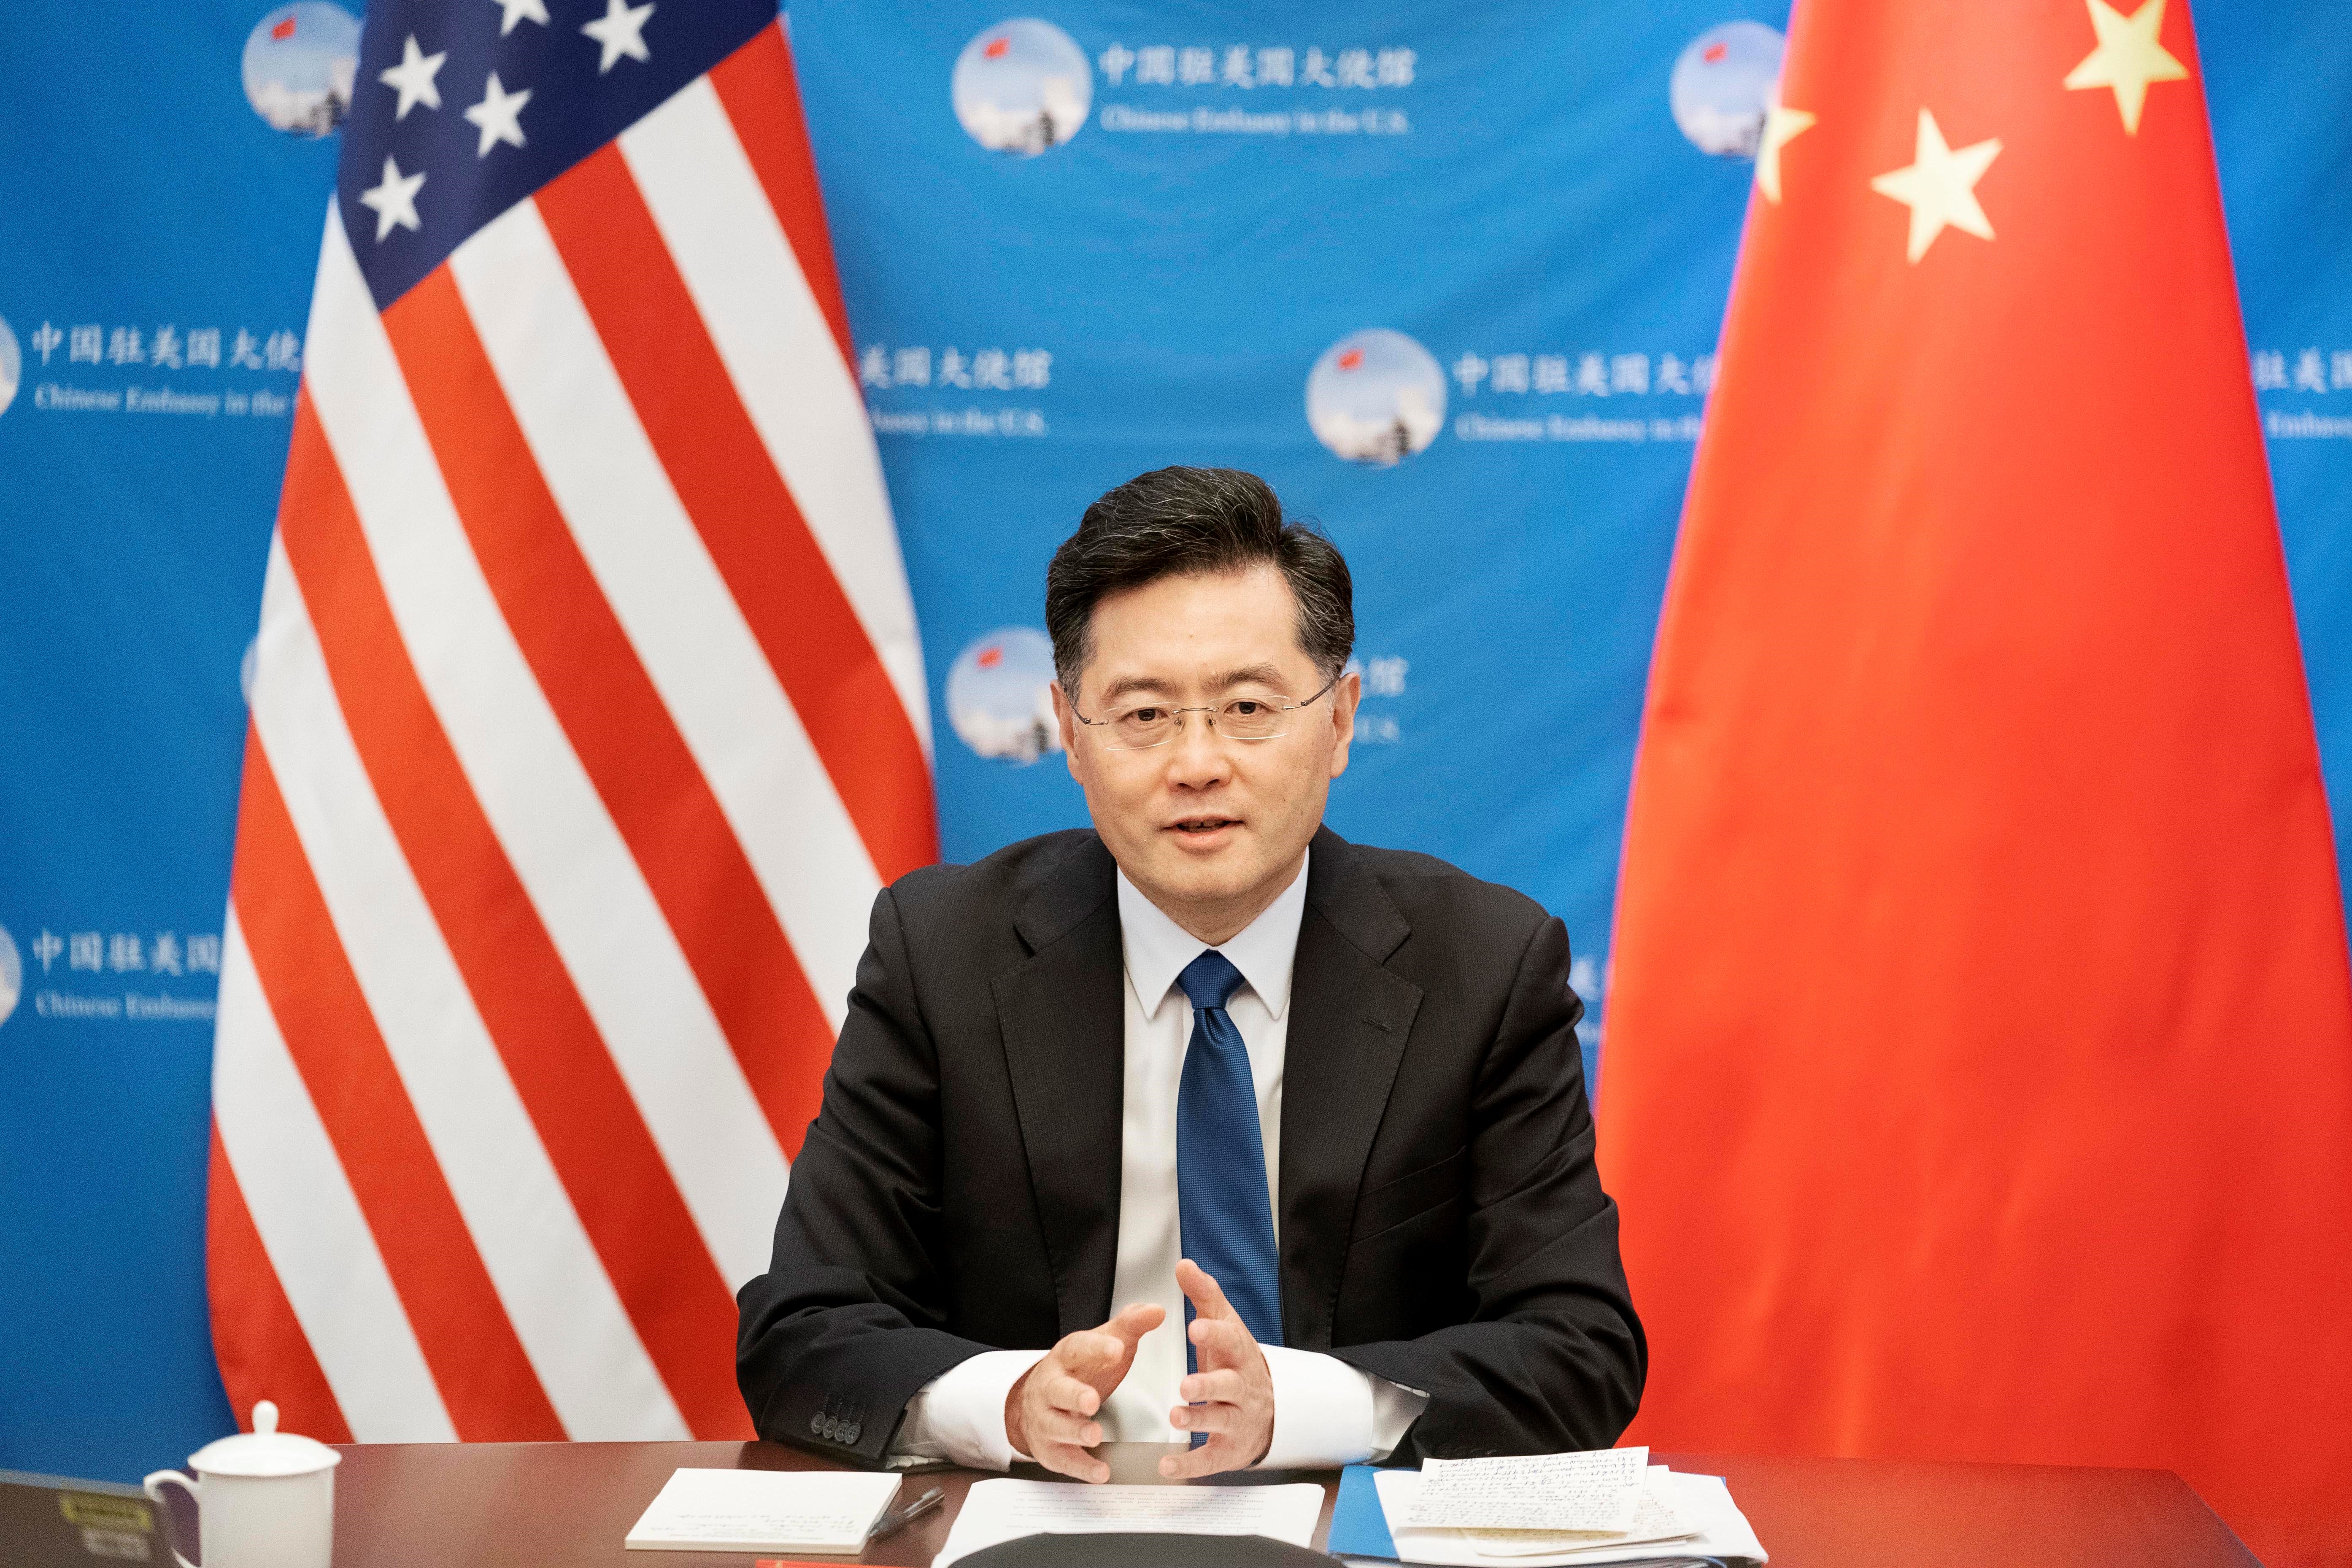 Chinese Ambassador to the United States Qin Gang delivers a keynote speech at the welcome event by the National Committee on U.S.-China Relations Board of Directors in Washington D.C. August 31st, 2021. 